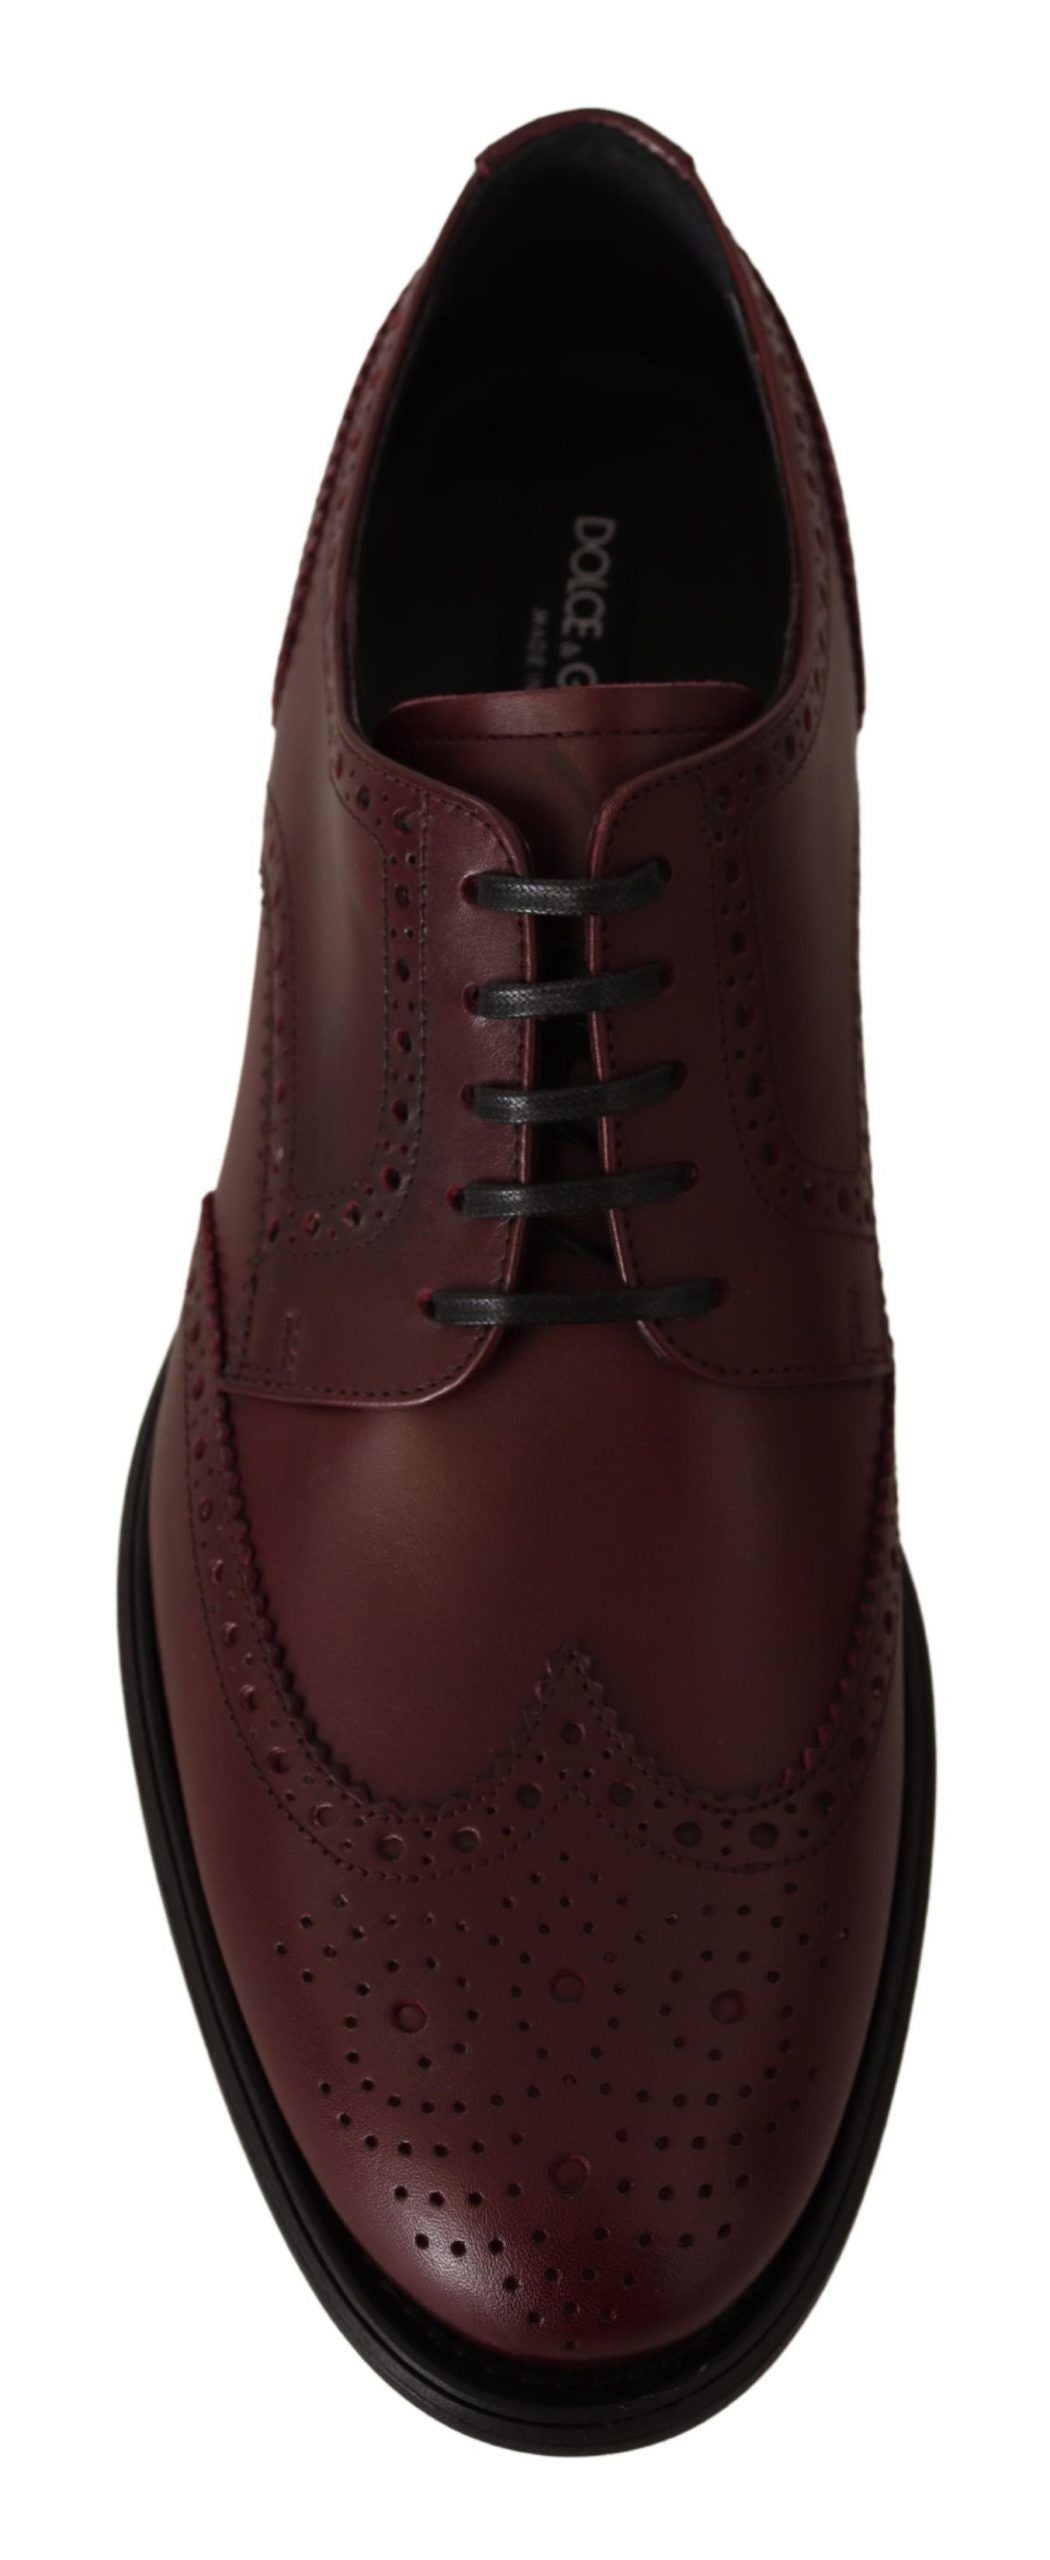 Dolce & Gabbana Bordeaux Leather Oxford Wingtip Formal Shoes - Designed by Dolce & Gabbana Available to Buy at a Discounted Price on Moon Behind The Hill Online Designer Discount Store